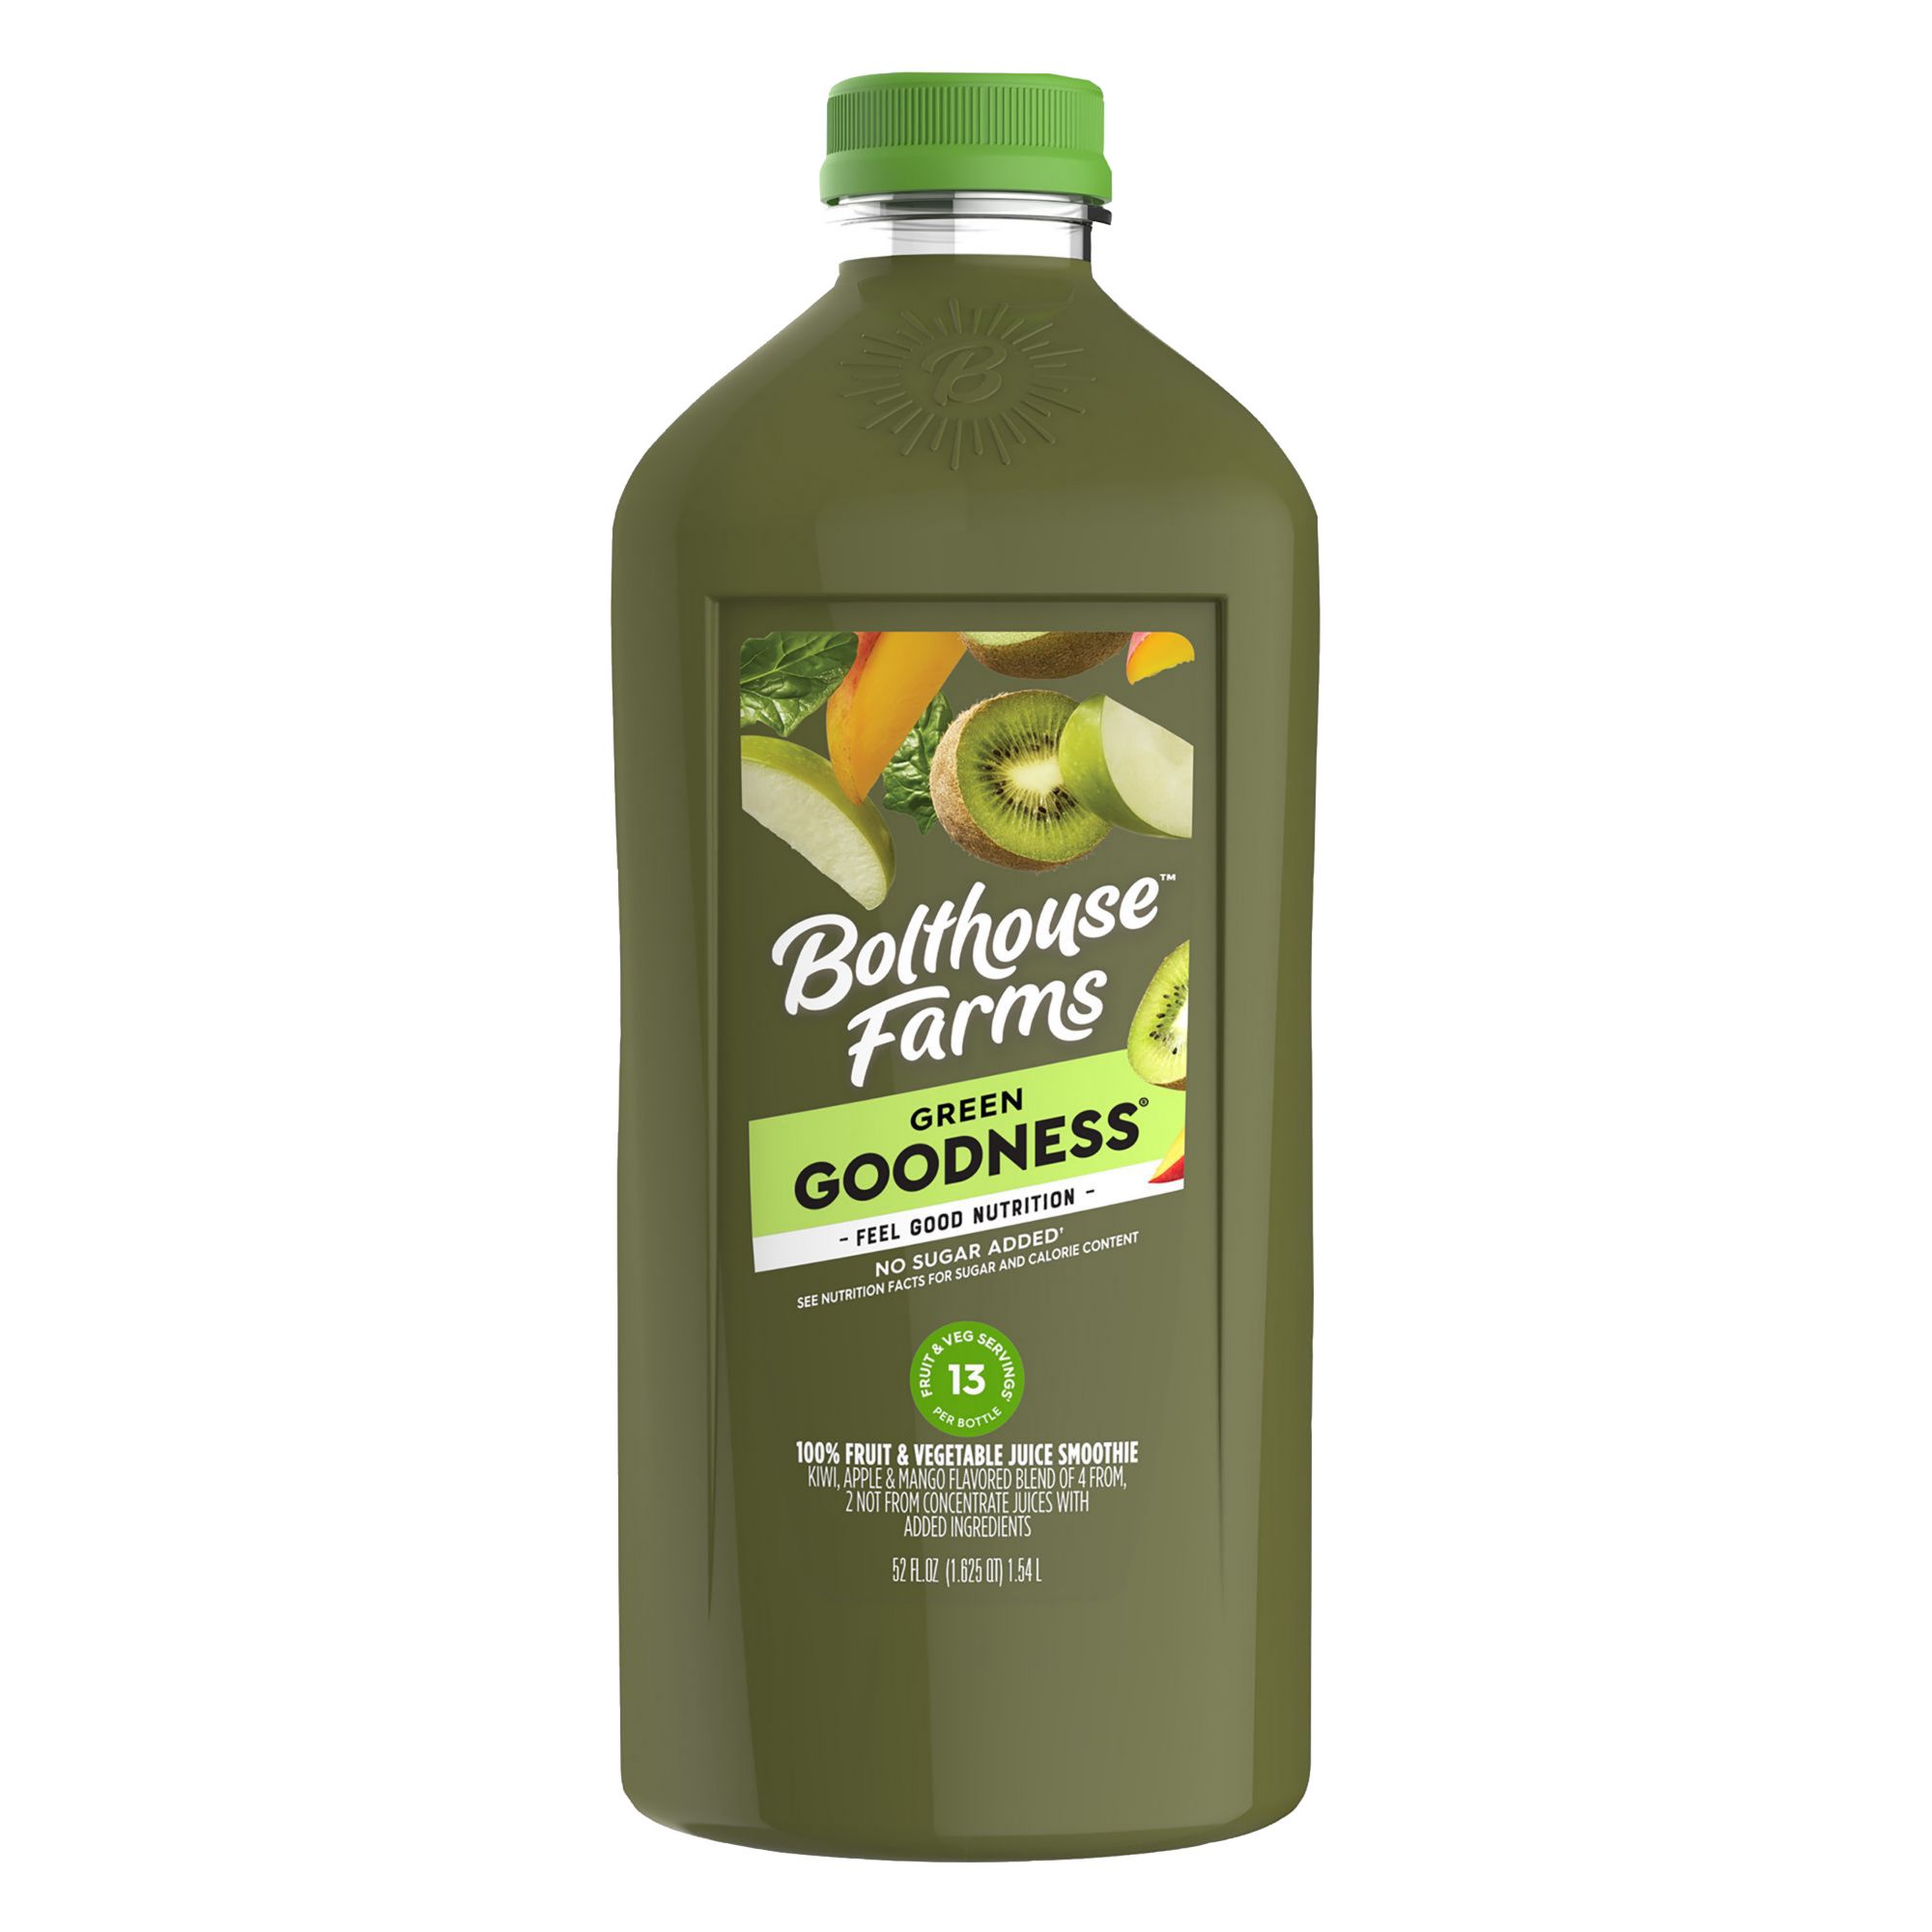 Bolthouse Farms Green Goodness 100% Fruit Juice Smoothie, 52 oz.